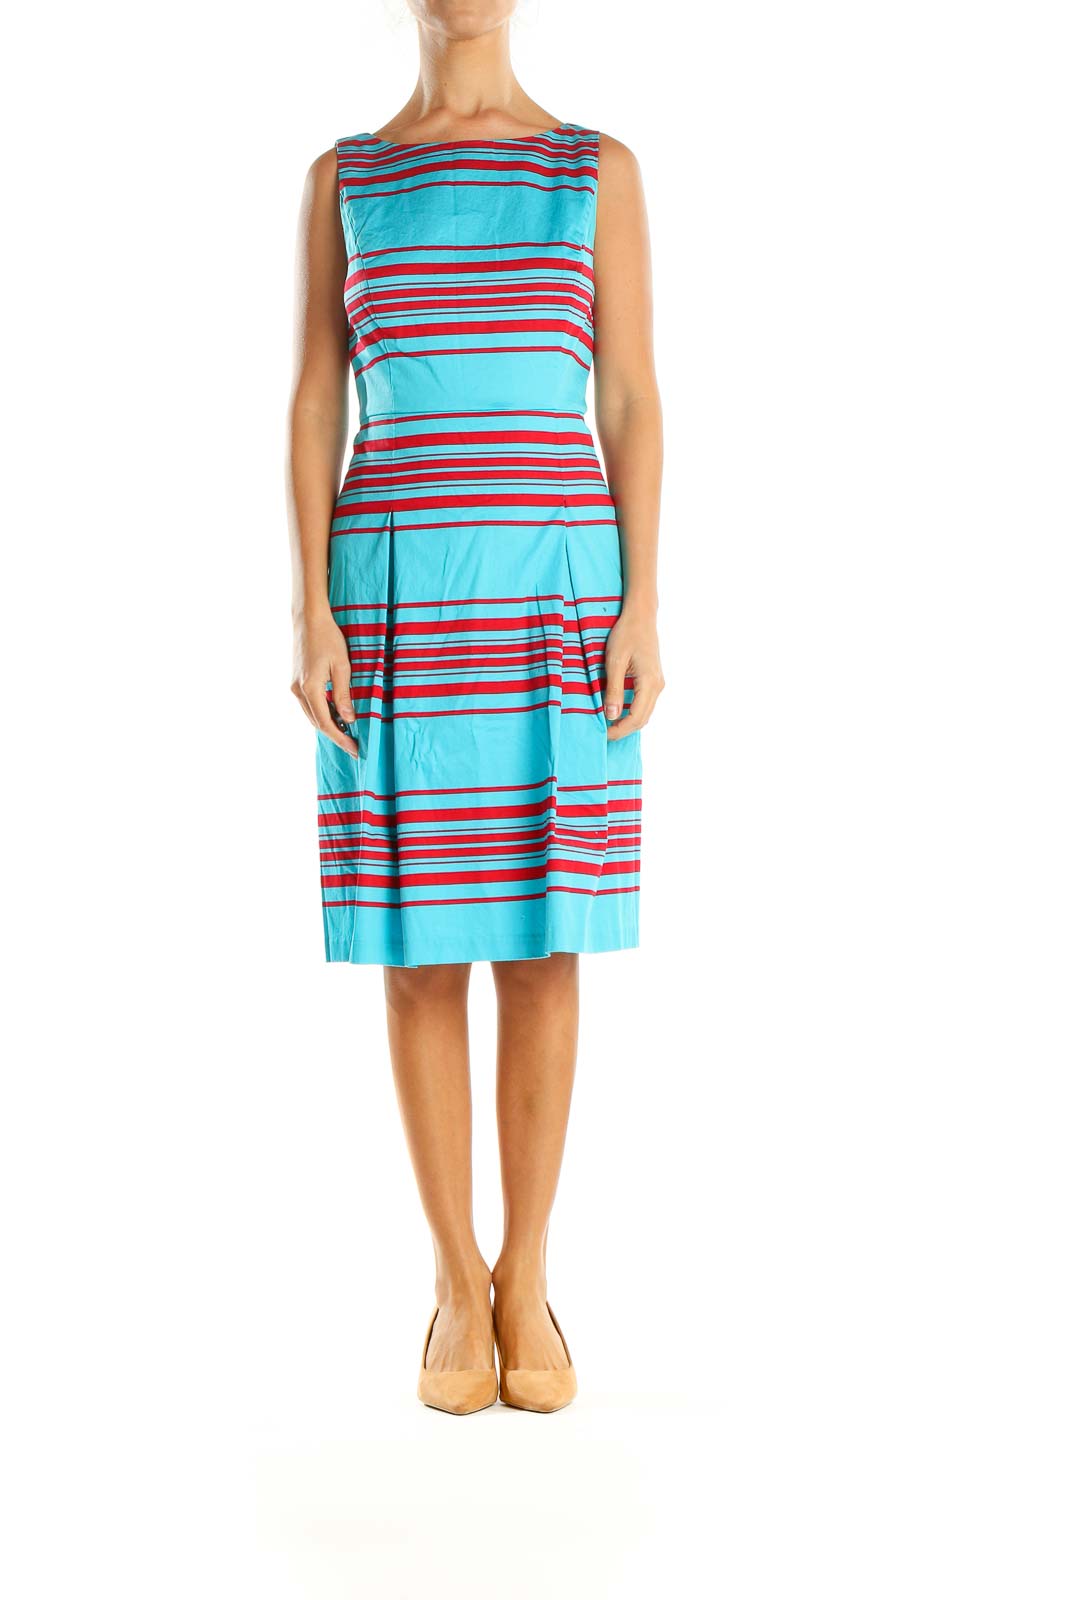 Talbots - Blue Striped Classic Fit & Flare Dress Polyester Cotton Elastane